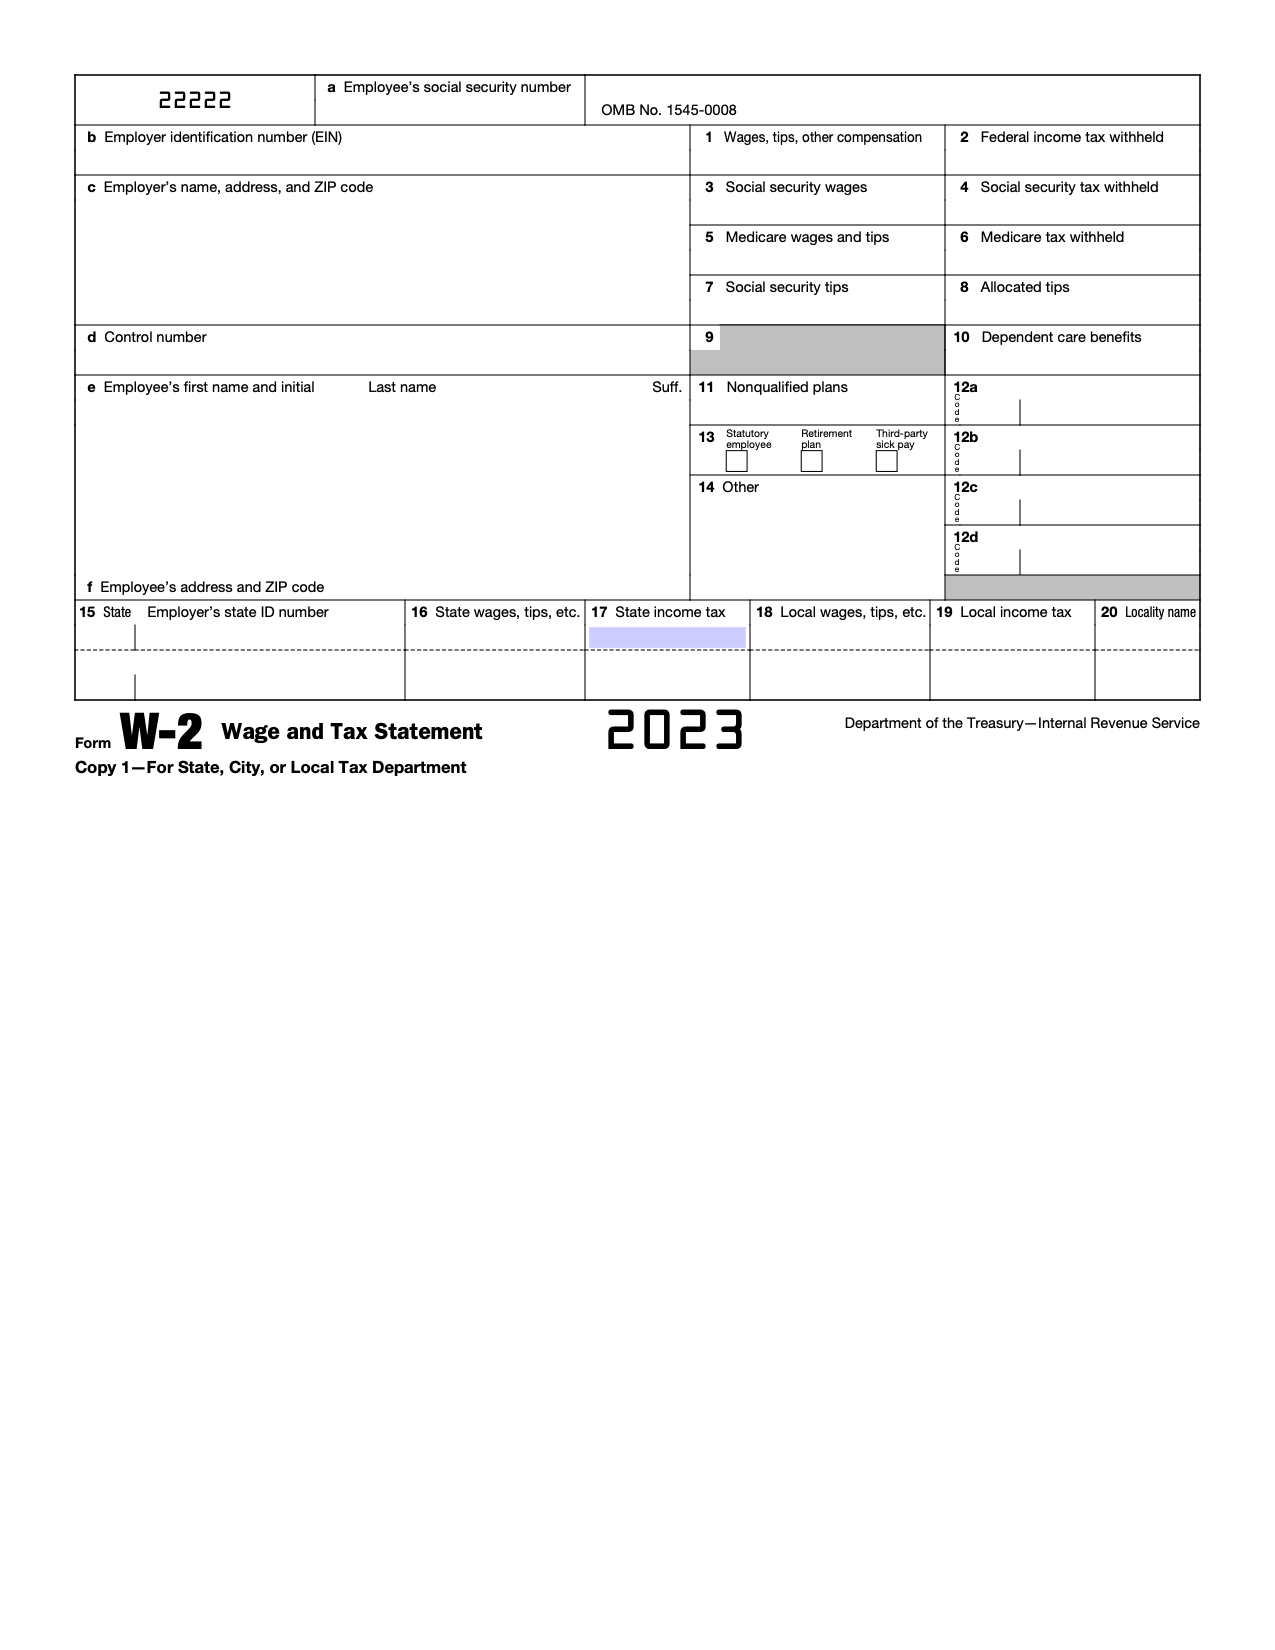 Free Irs Form W-2 | Wage And Tax Statement - Pdf – Eforms intended for W2 Form 12A